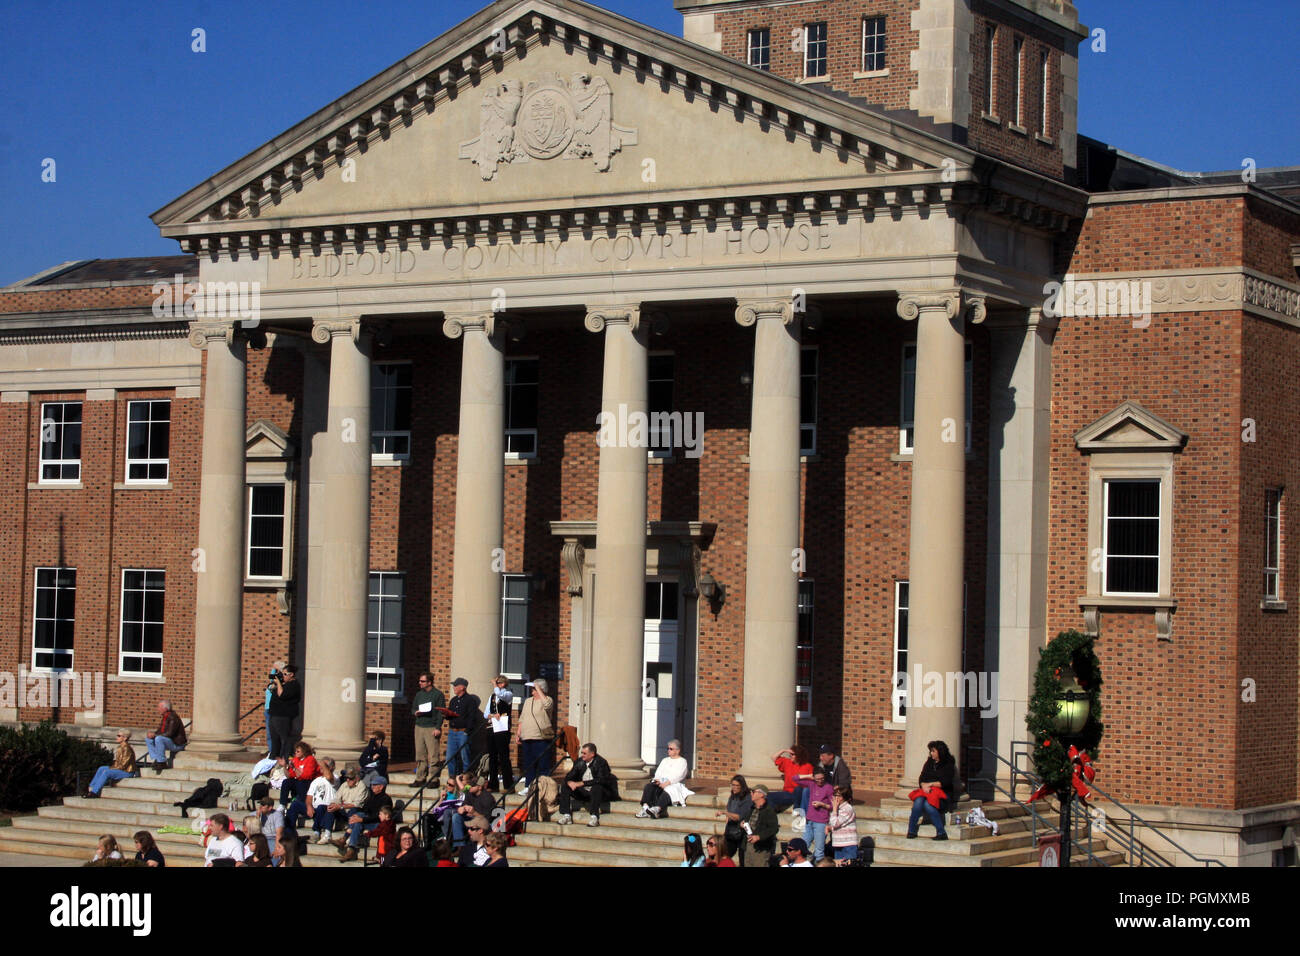 Bedford, VA, USA. People on the steps of Bedford County Courthouse